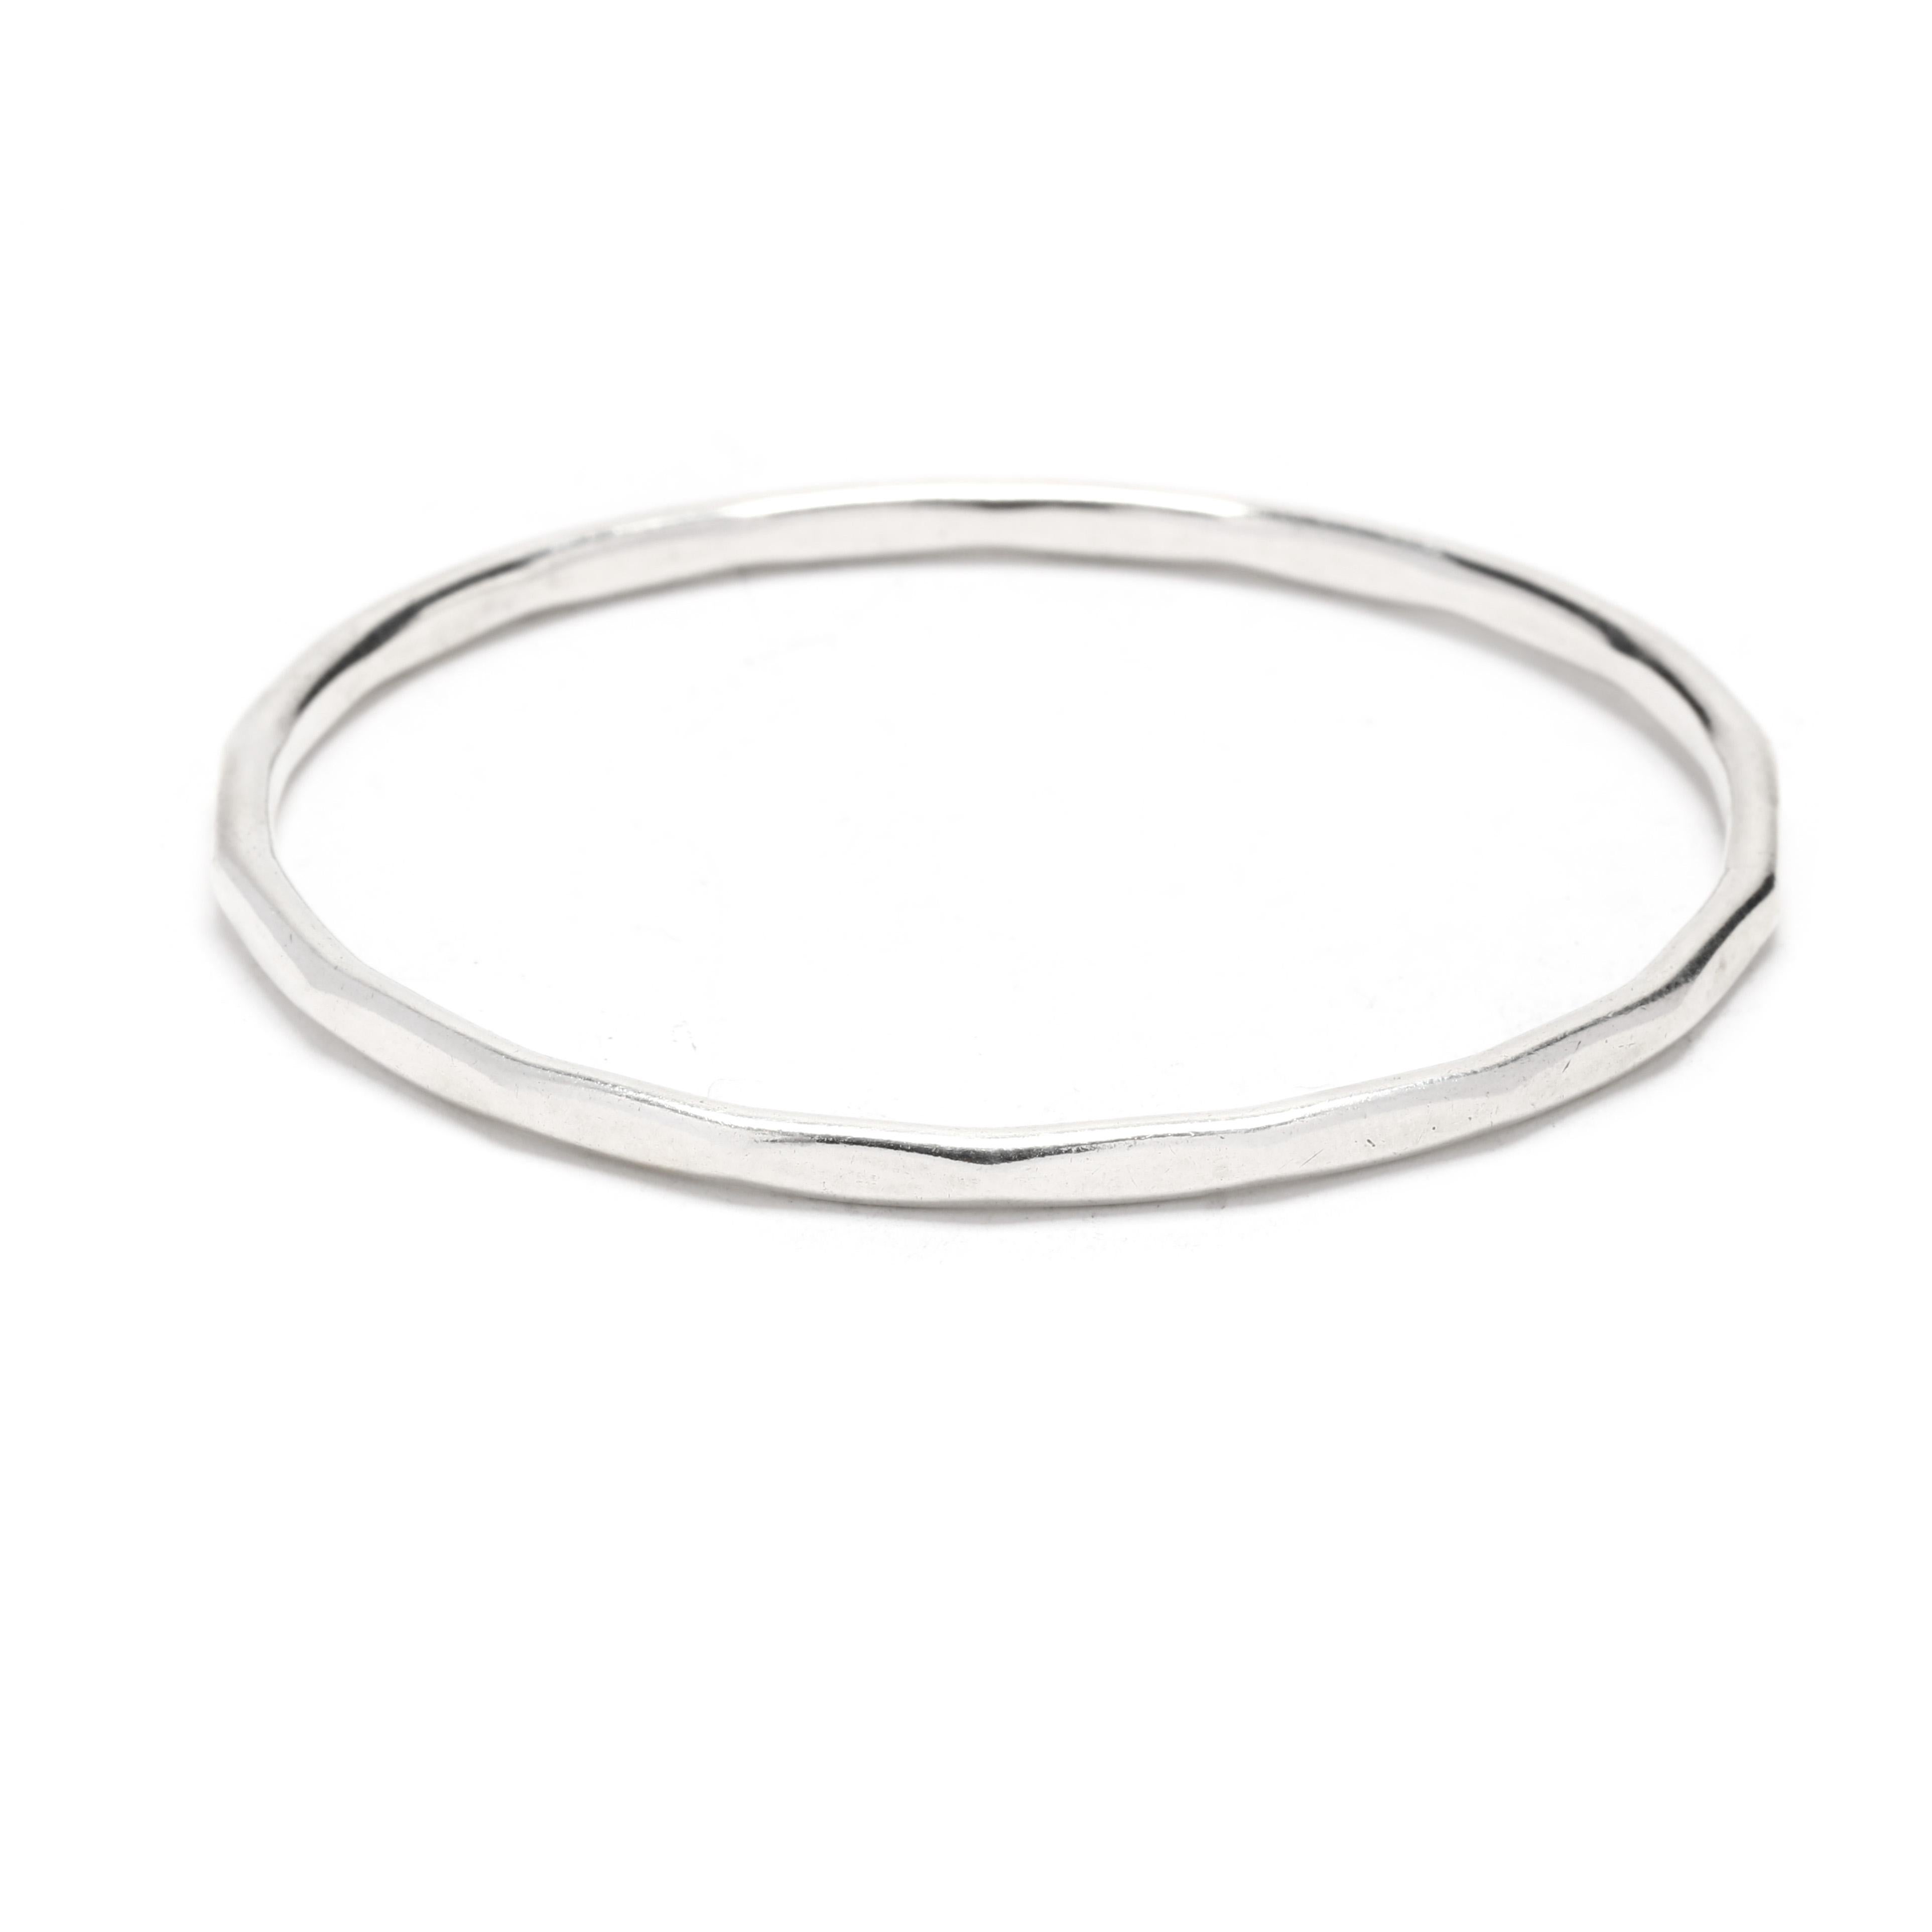 A vintage sterling silver bangle bracelet, This stackable bracelet features a rounded interior, the exterior with flattened sections to create a geometric design.  It tests sterling silver. 

Length: 7.75 inch interior circumference

Width: 3.7